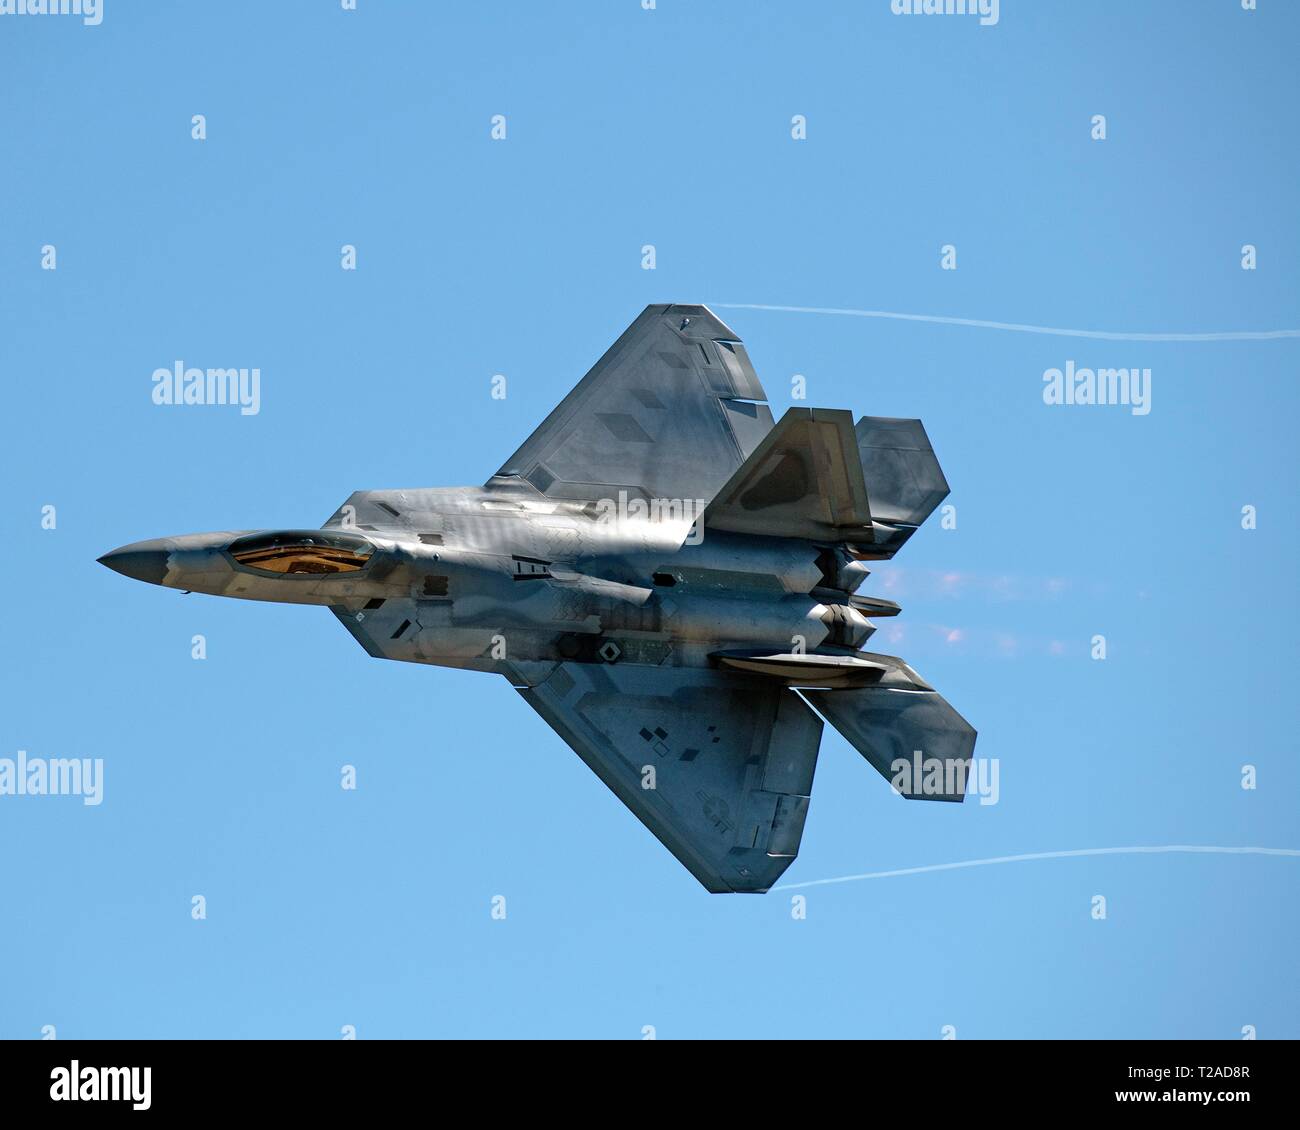 A U.S. Air Force F-22 Raptor stealth fighter aircraft performs aerial maneuvers during the Thunder Over the Bay air show at Travis Air Force Base March 30, 2019 in Fairfield, California. Stock Photo